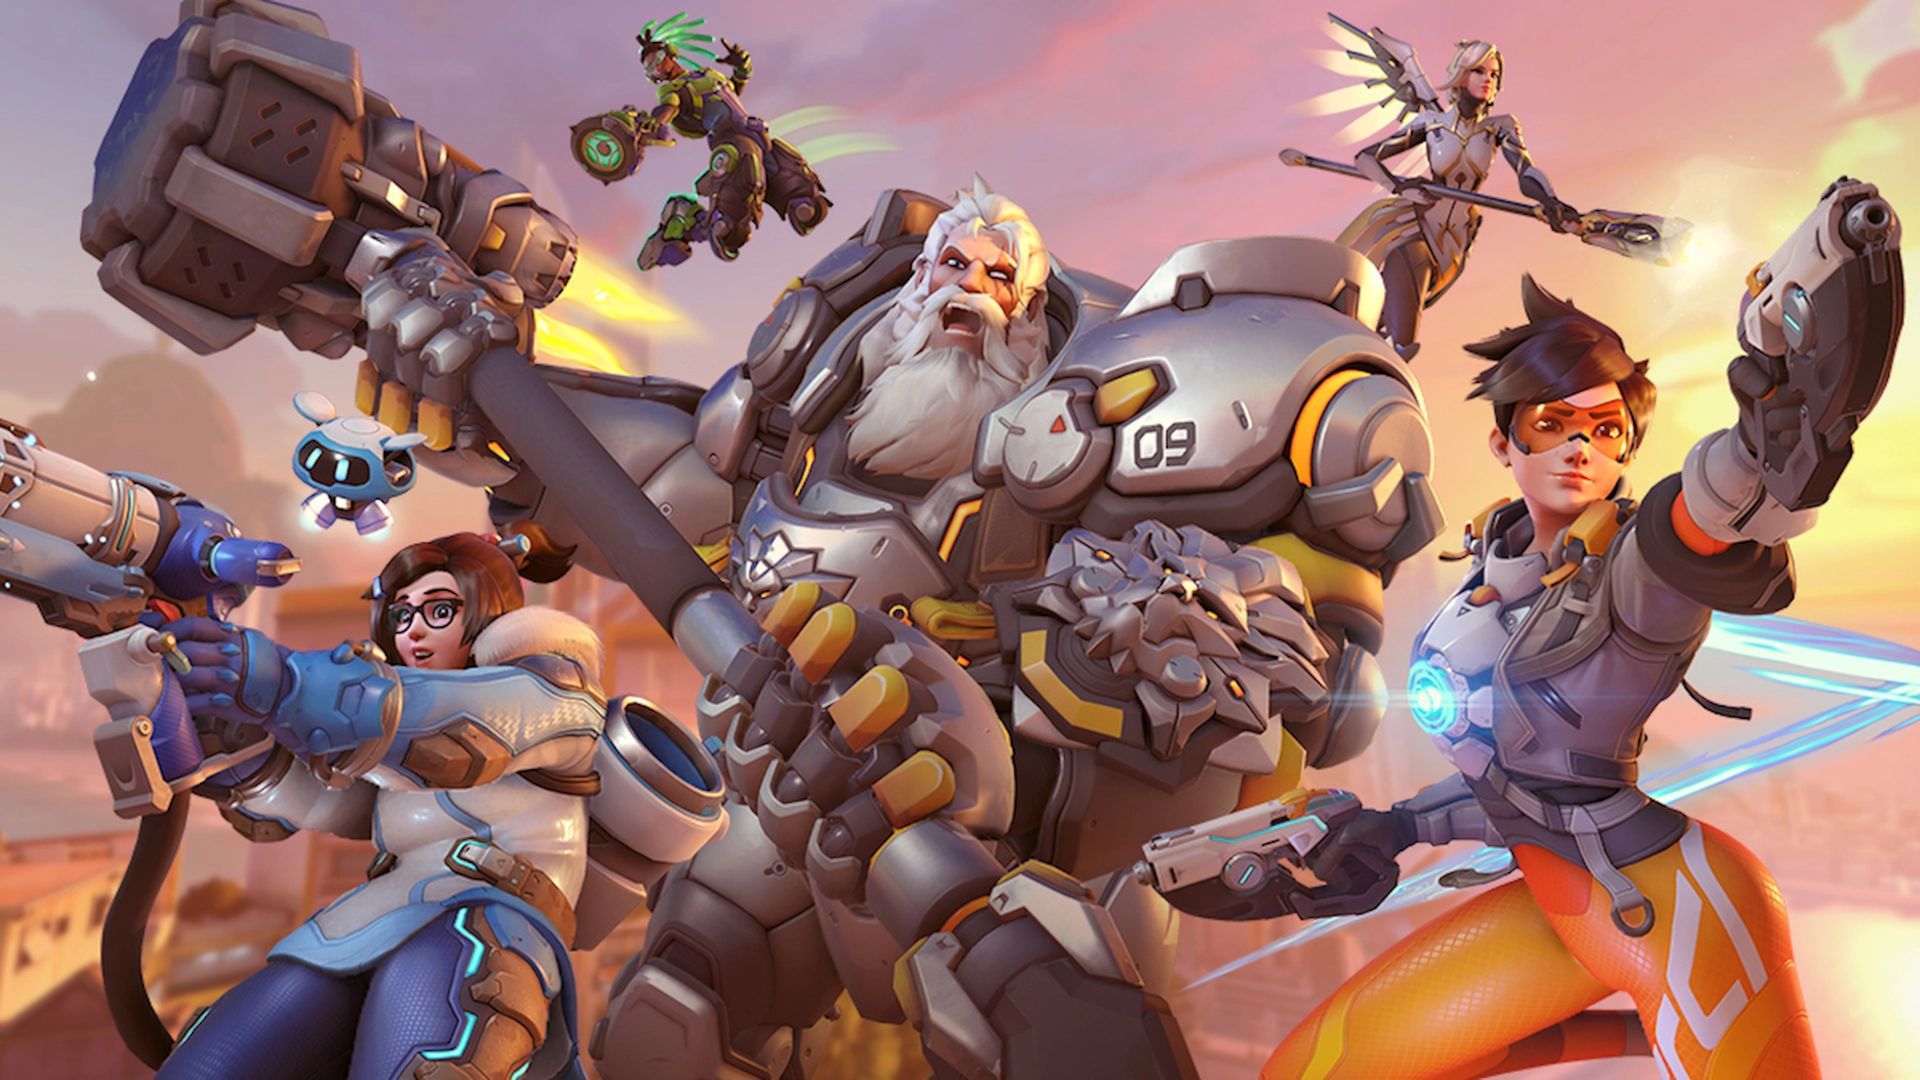 Now that Overwatch 2 PvP is released as free-to-play, here is our guide on Overwatch 2 ranking system and how to unlock competitive in Overwatch 2.